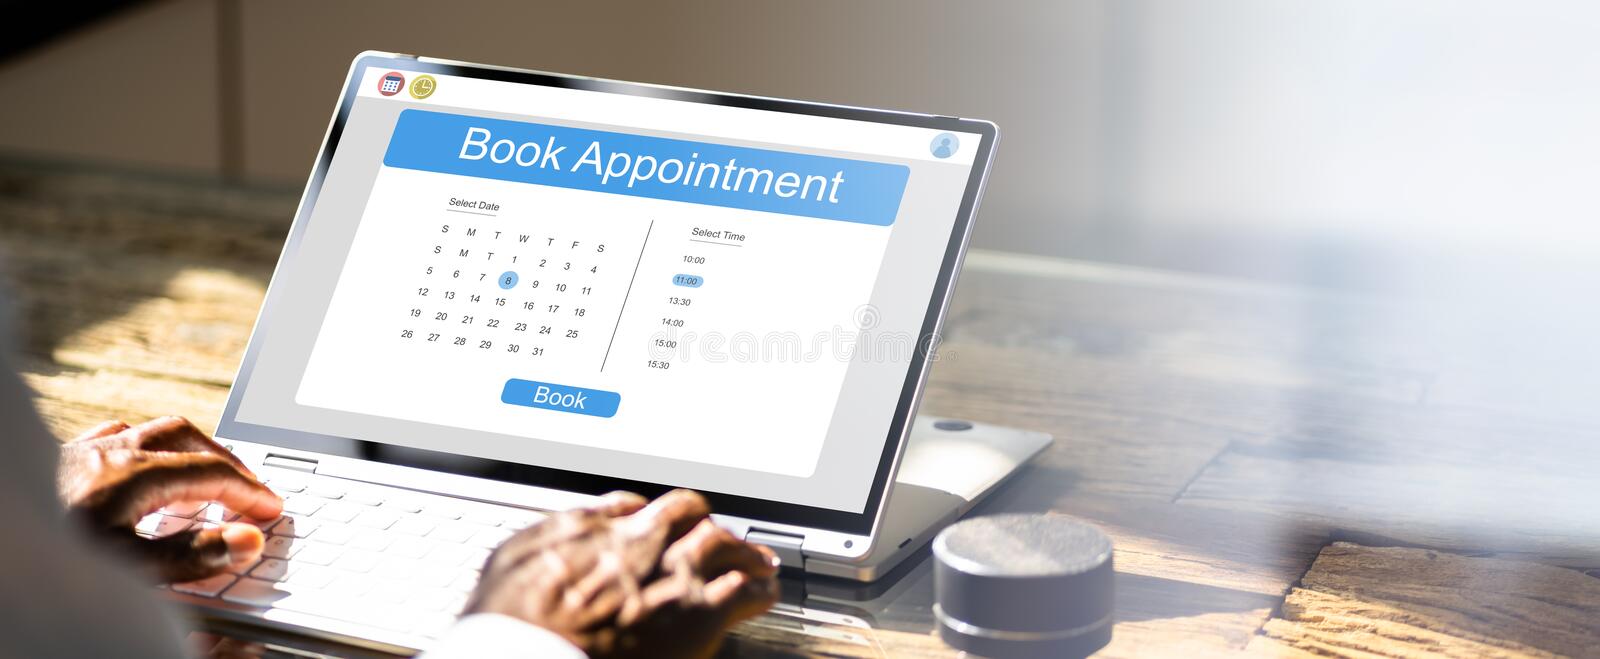 Scheduling Online Appointments: An Overview